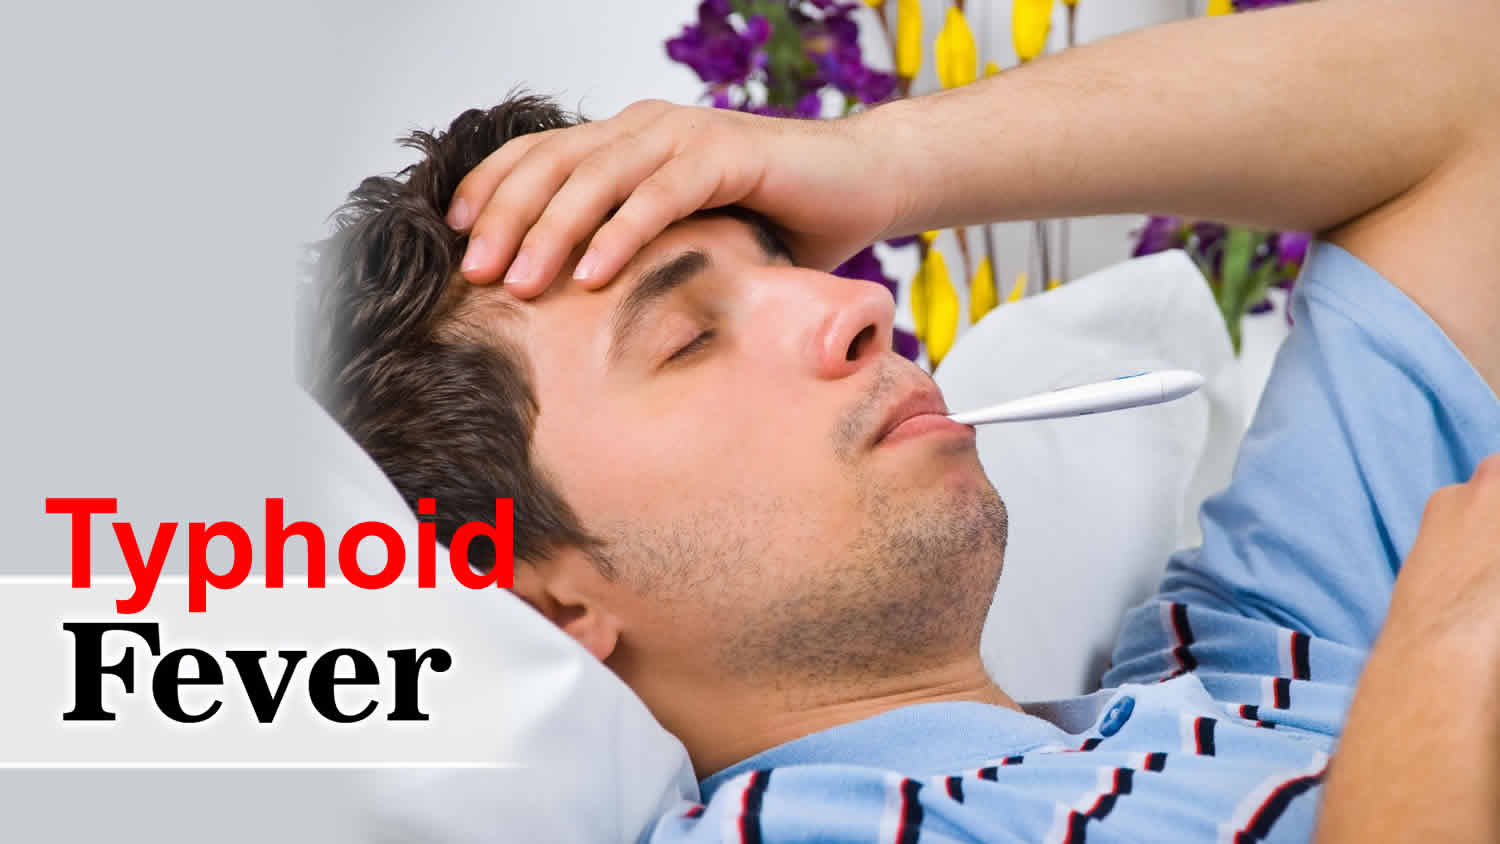 Typhoid Fever: Here Are Causes, Symptoms And Treatment